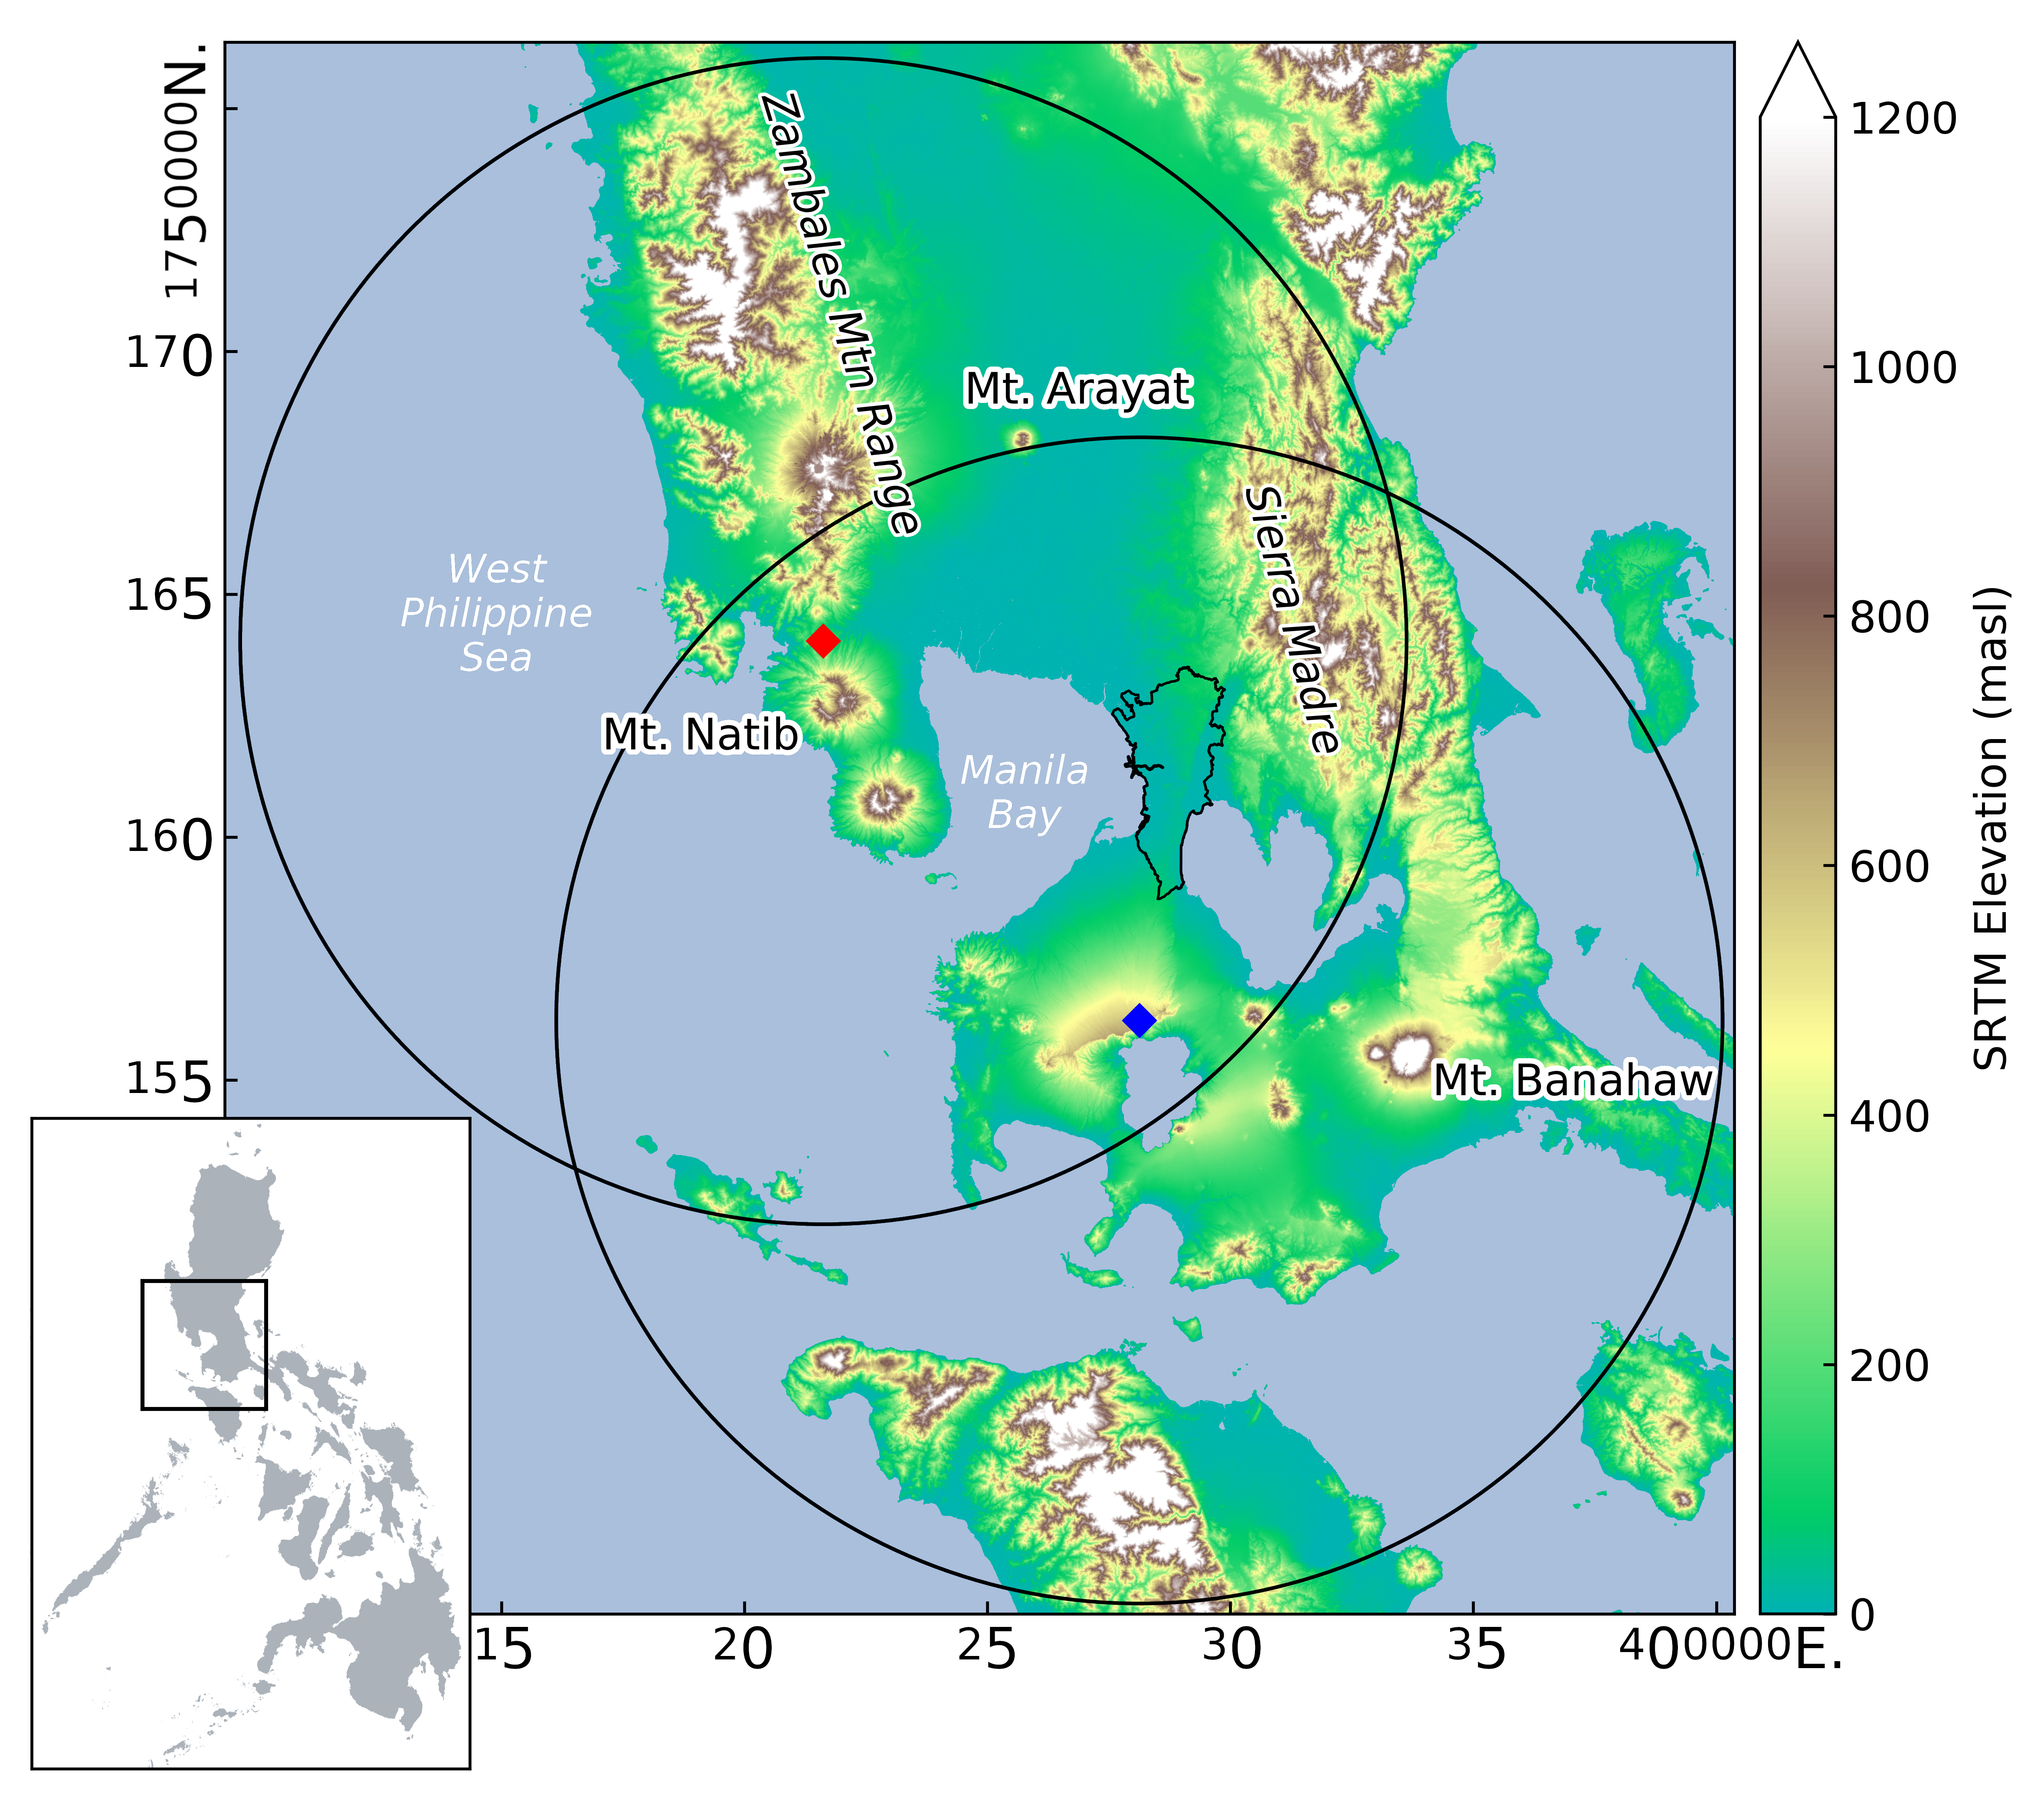 Subic (red diamond) and Tagaytay (blue diamond) radars and their coverage. The underlying DEM shows the complex topography surrounding the radars. In both coverages lies Metropolitan Manila (in black outline), the country’s capital and most populated city.